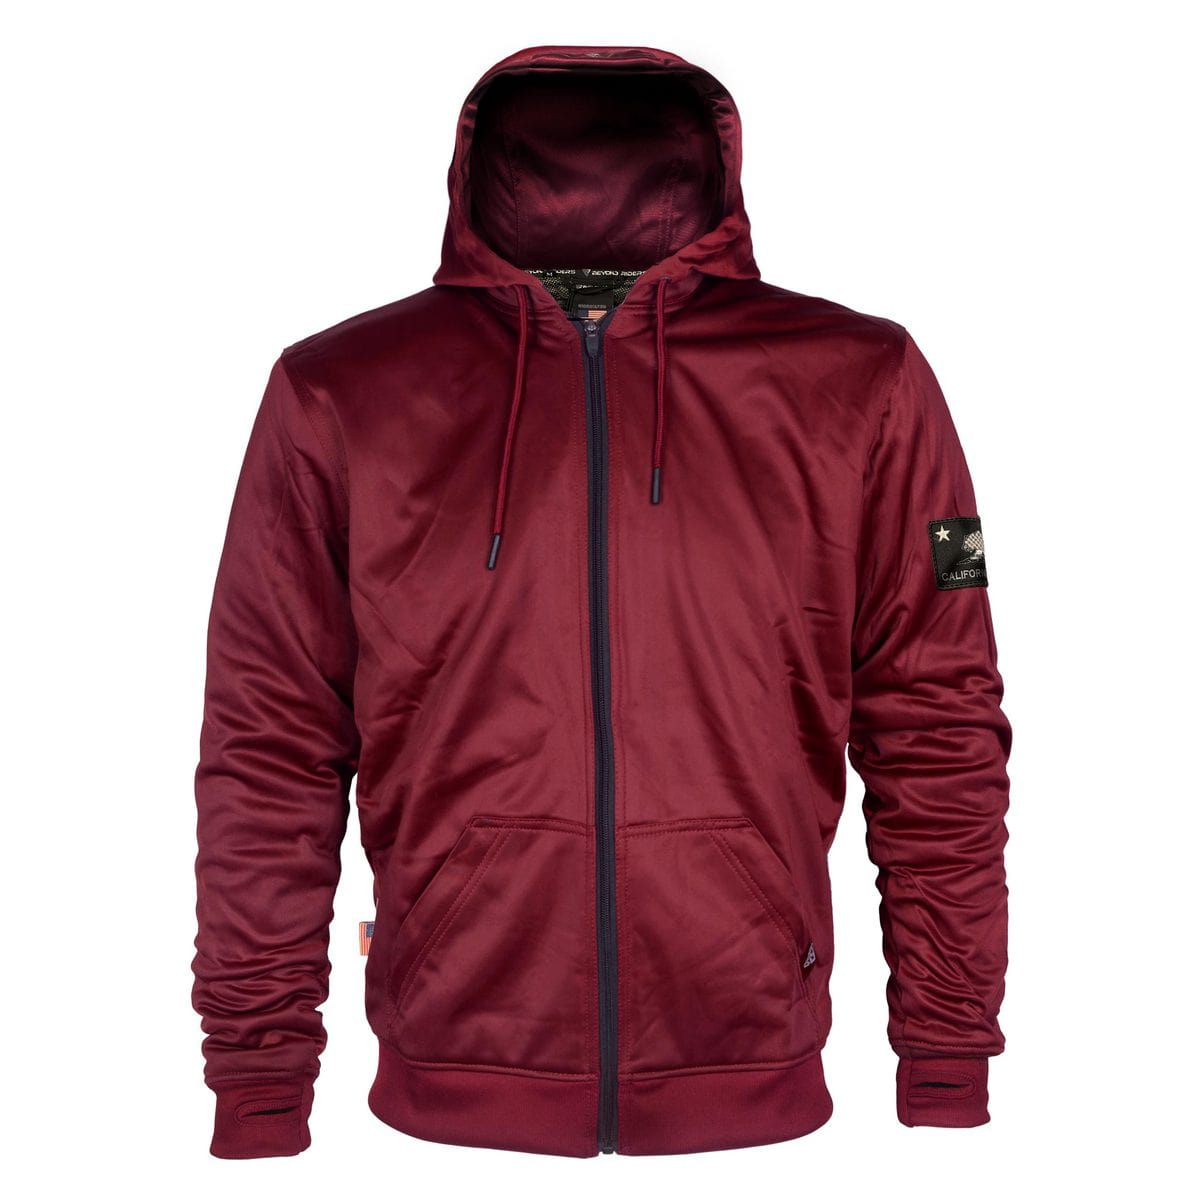 Red Maroon Solid Ultra Protective Hoodie with Pads - REVRides